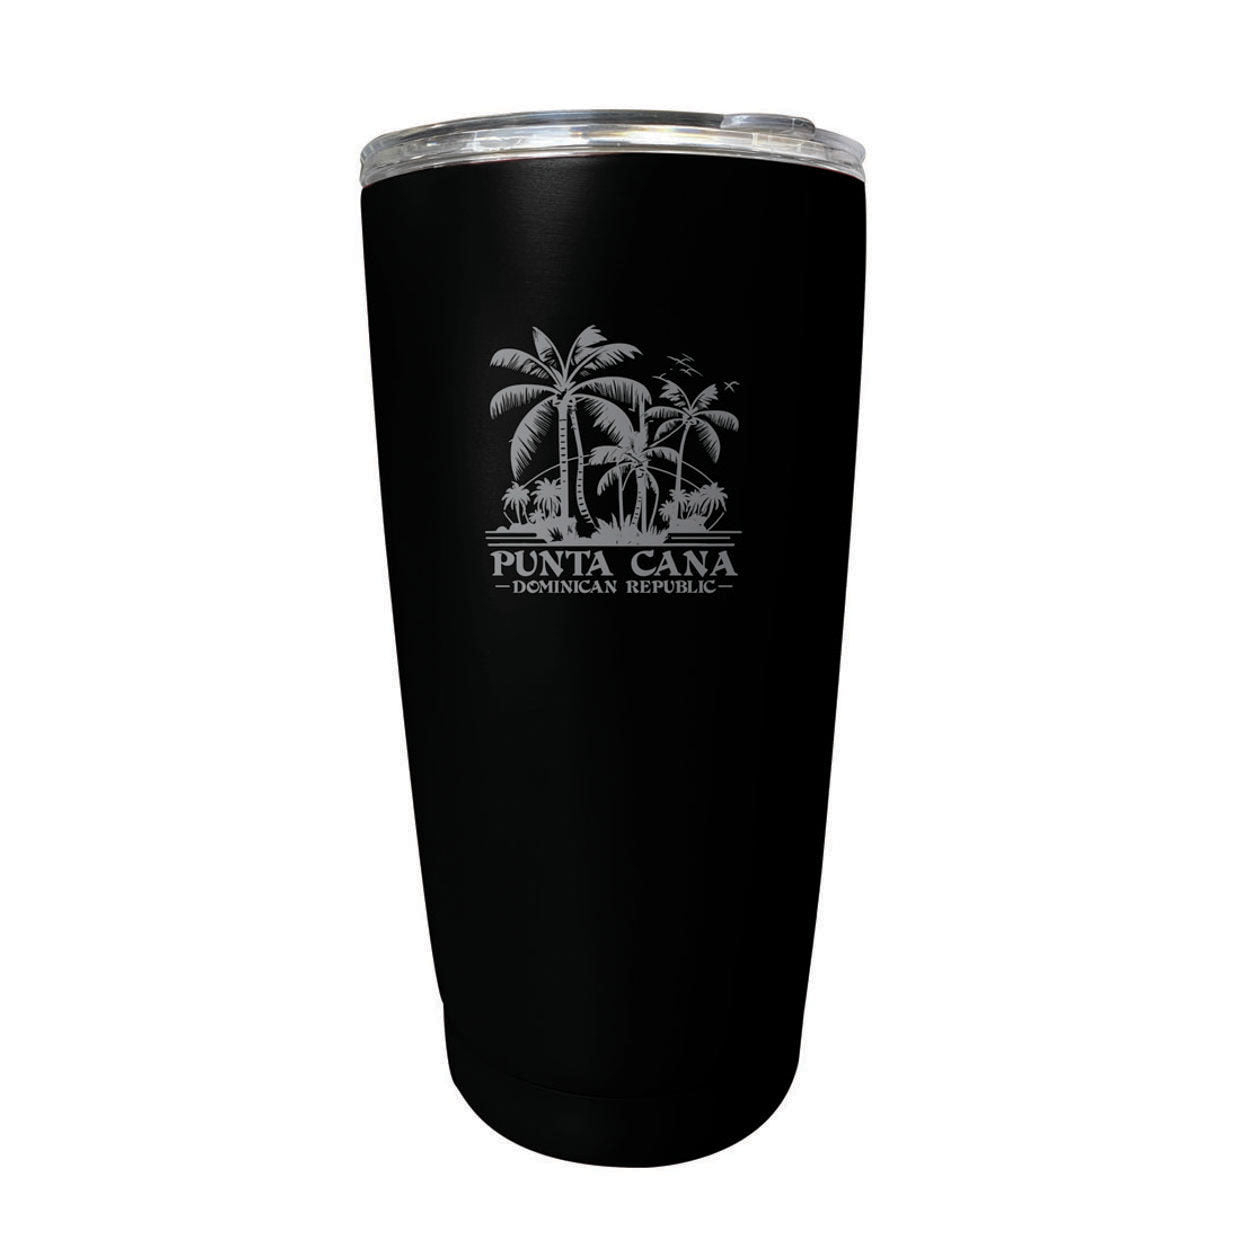 Punta Cana Dominican Republic Souvenir 16 Oz Stainless Steel Insulated Tumbler Etched - Pink, PALM BEACH